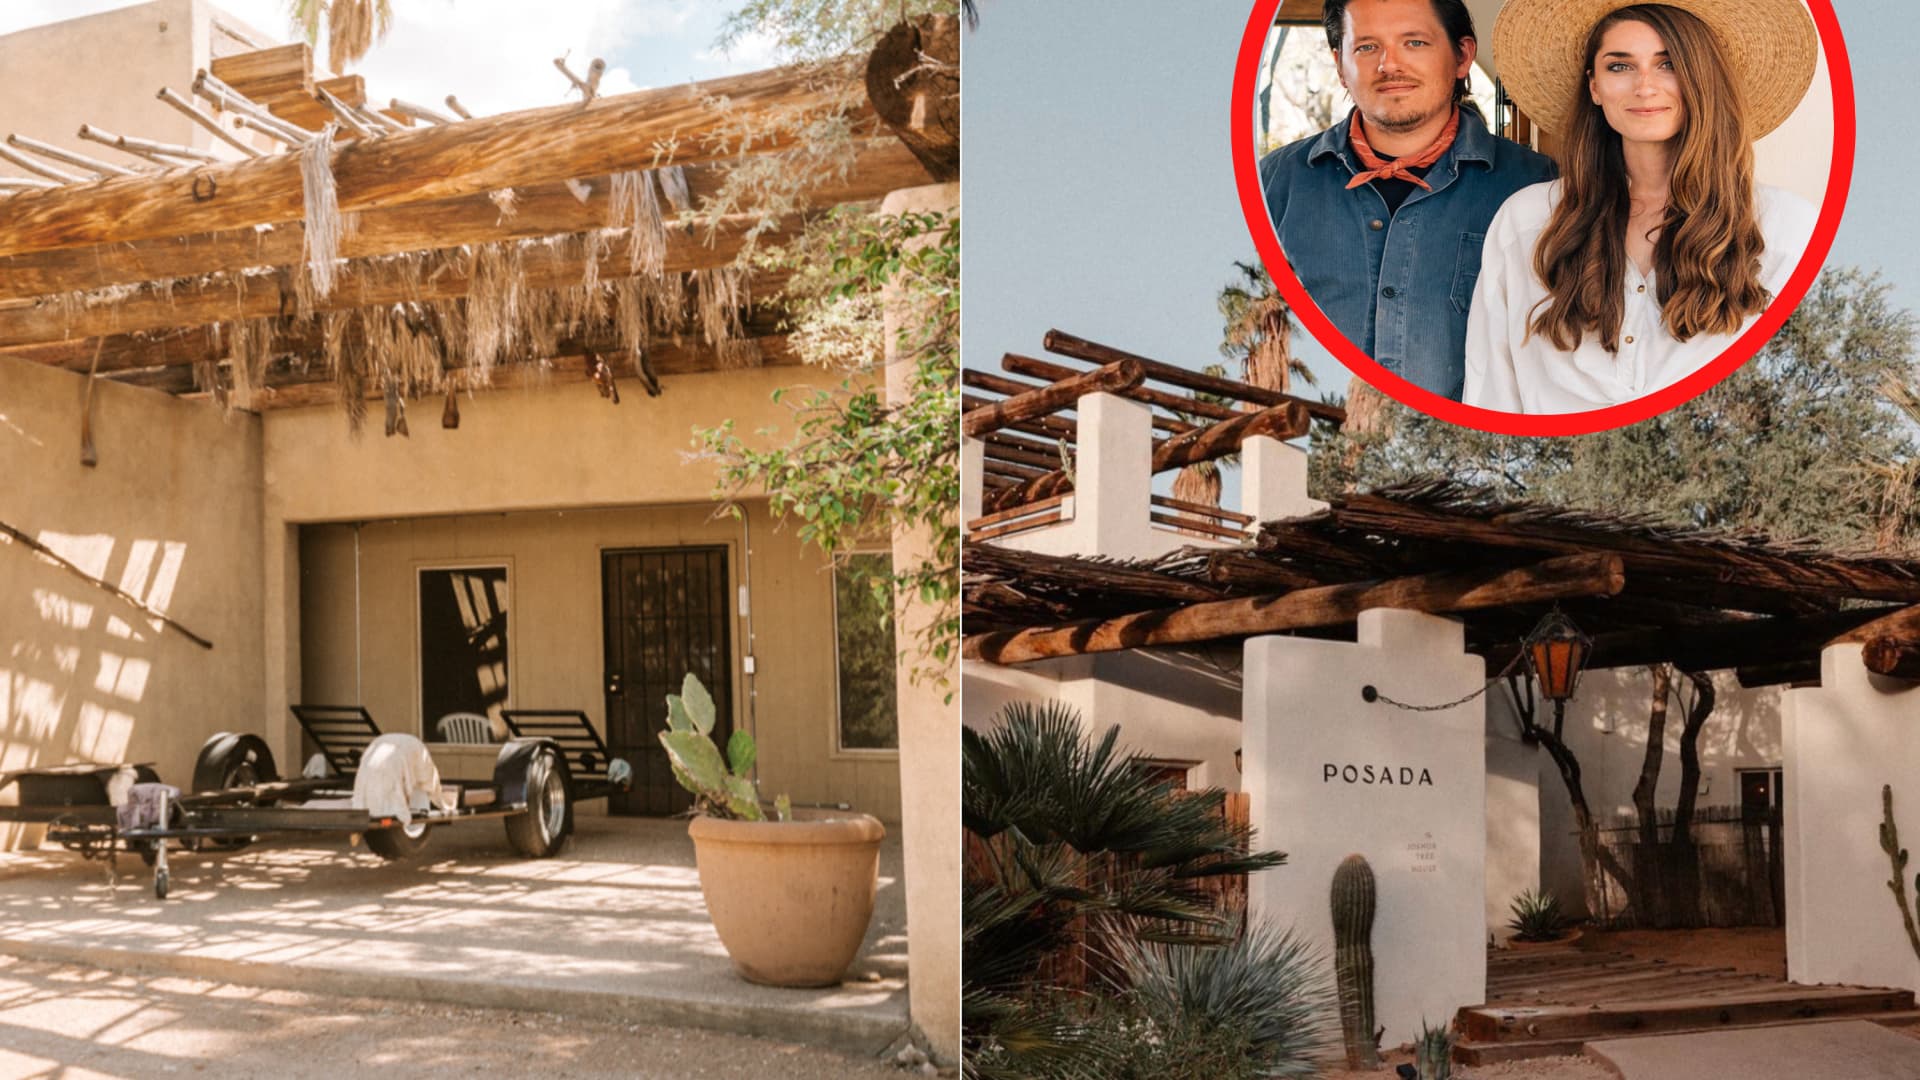 This couple bought an abandoned inn near Saguaro National Park for $615,000 and turned it into a desert oasis